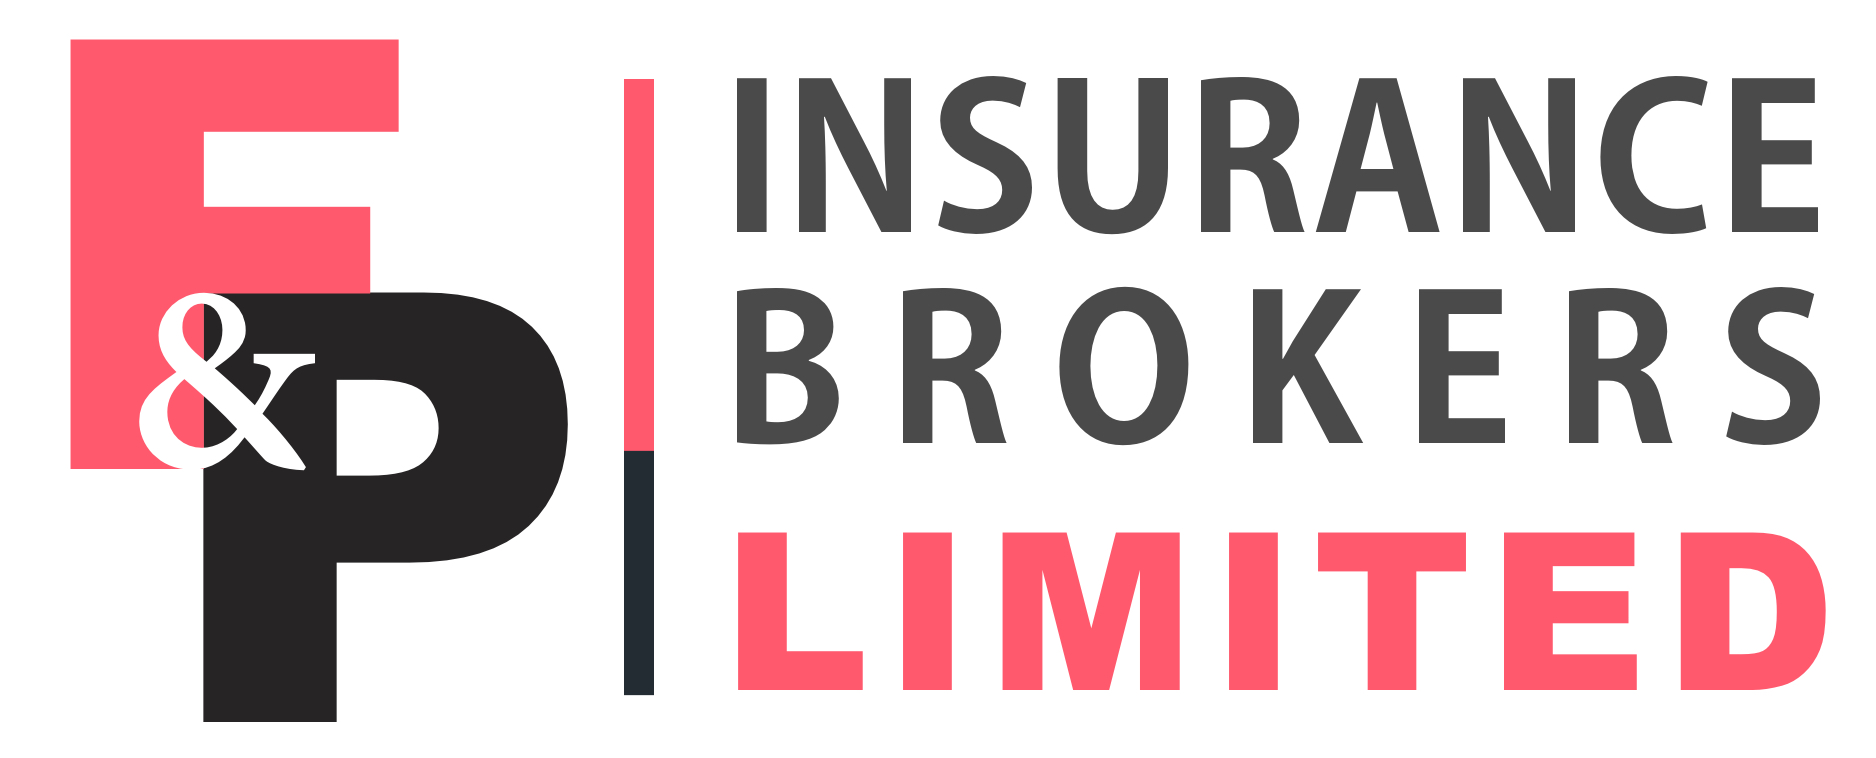 F&P Insurance Brokers Limited